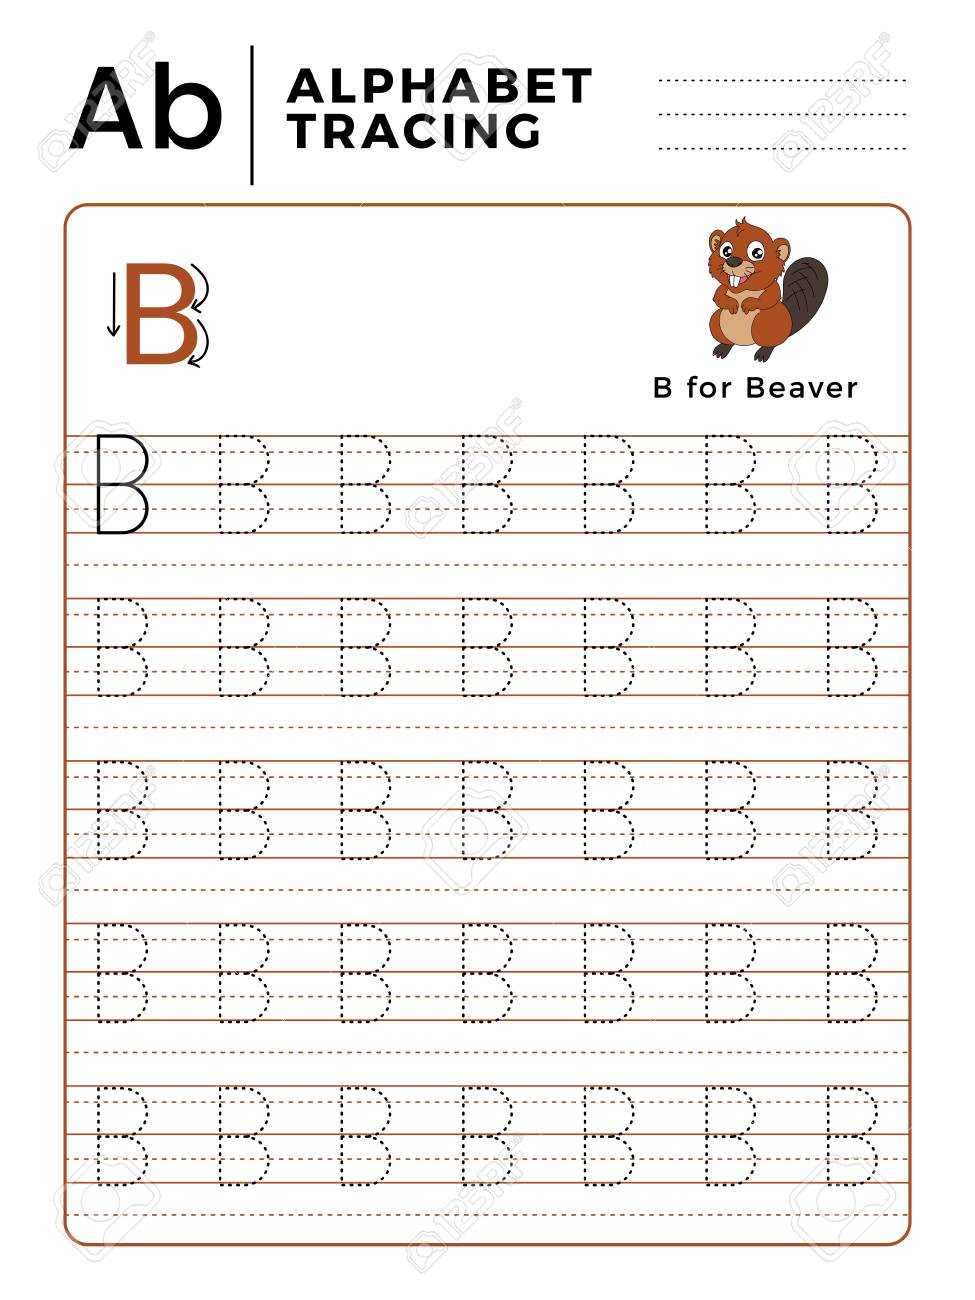 Letter B Alphabet Tracing Book With Example And Funny Beaver..